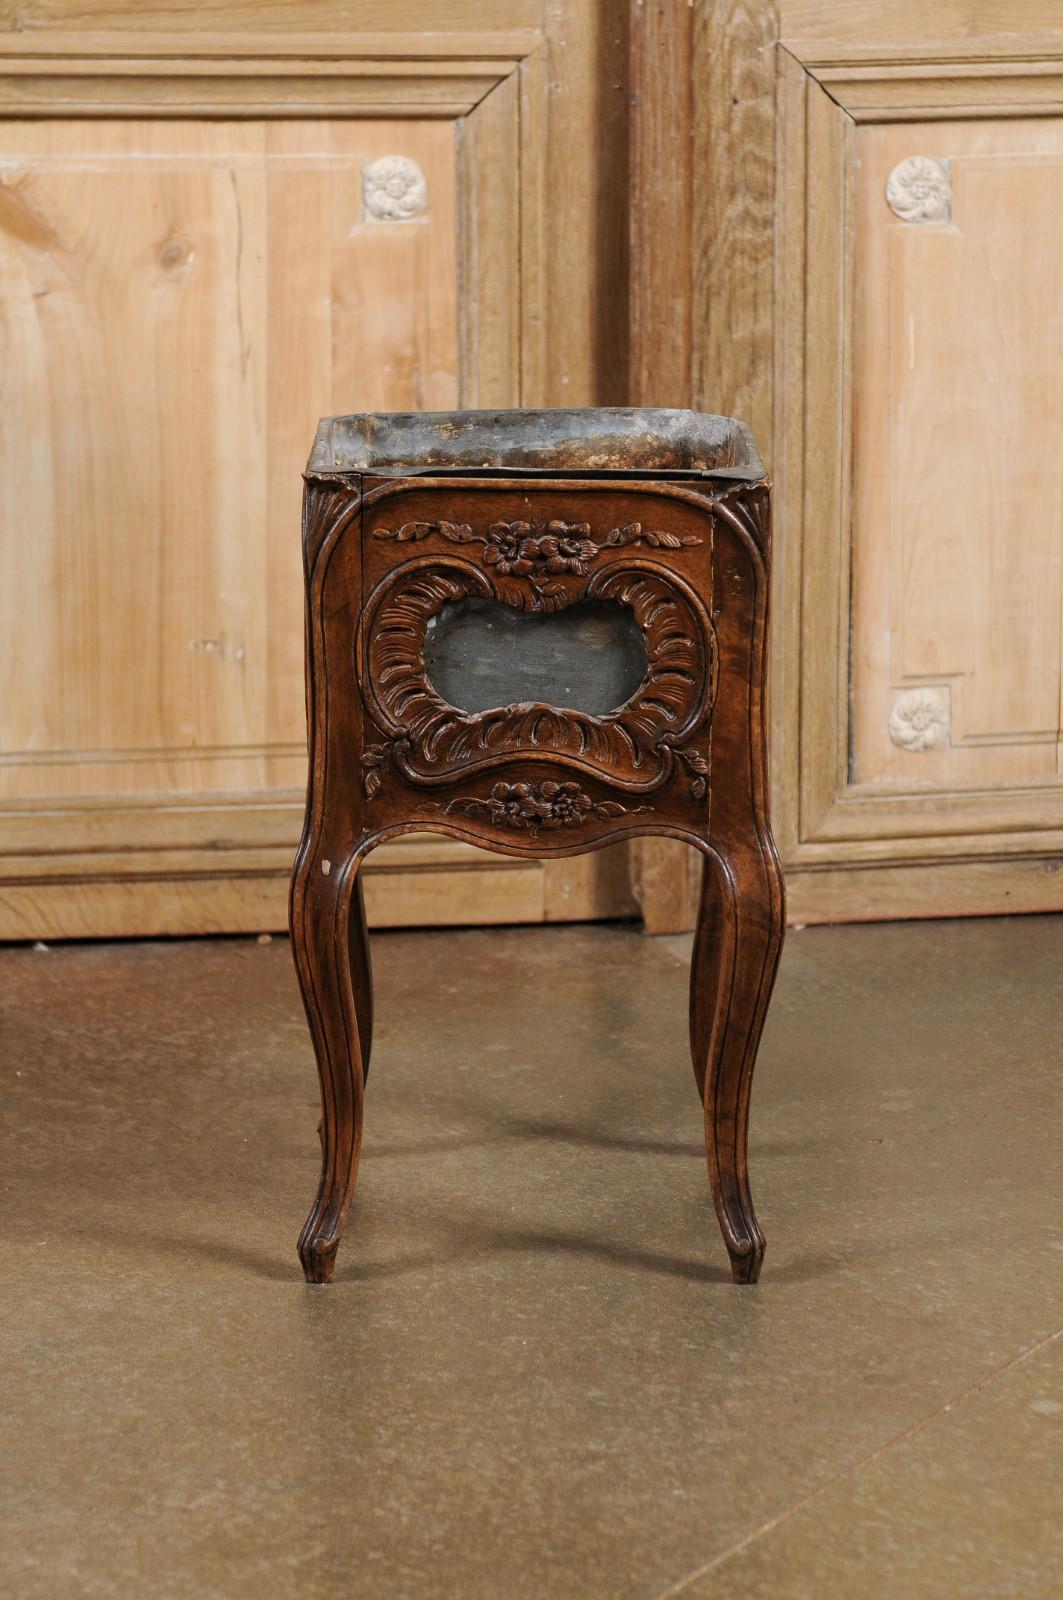 French 1890s Rococo Revival Walnut Planter with Rocailles and Floral Motifs For Sale 4